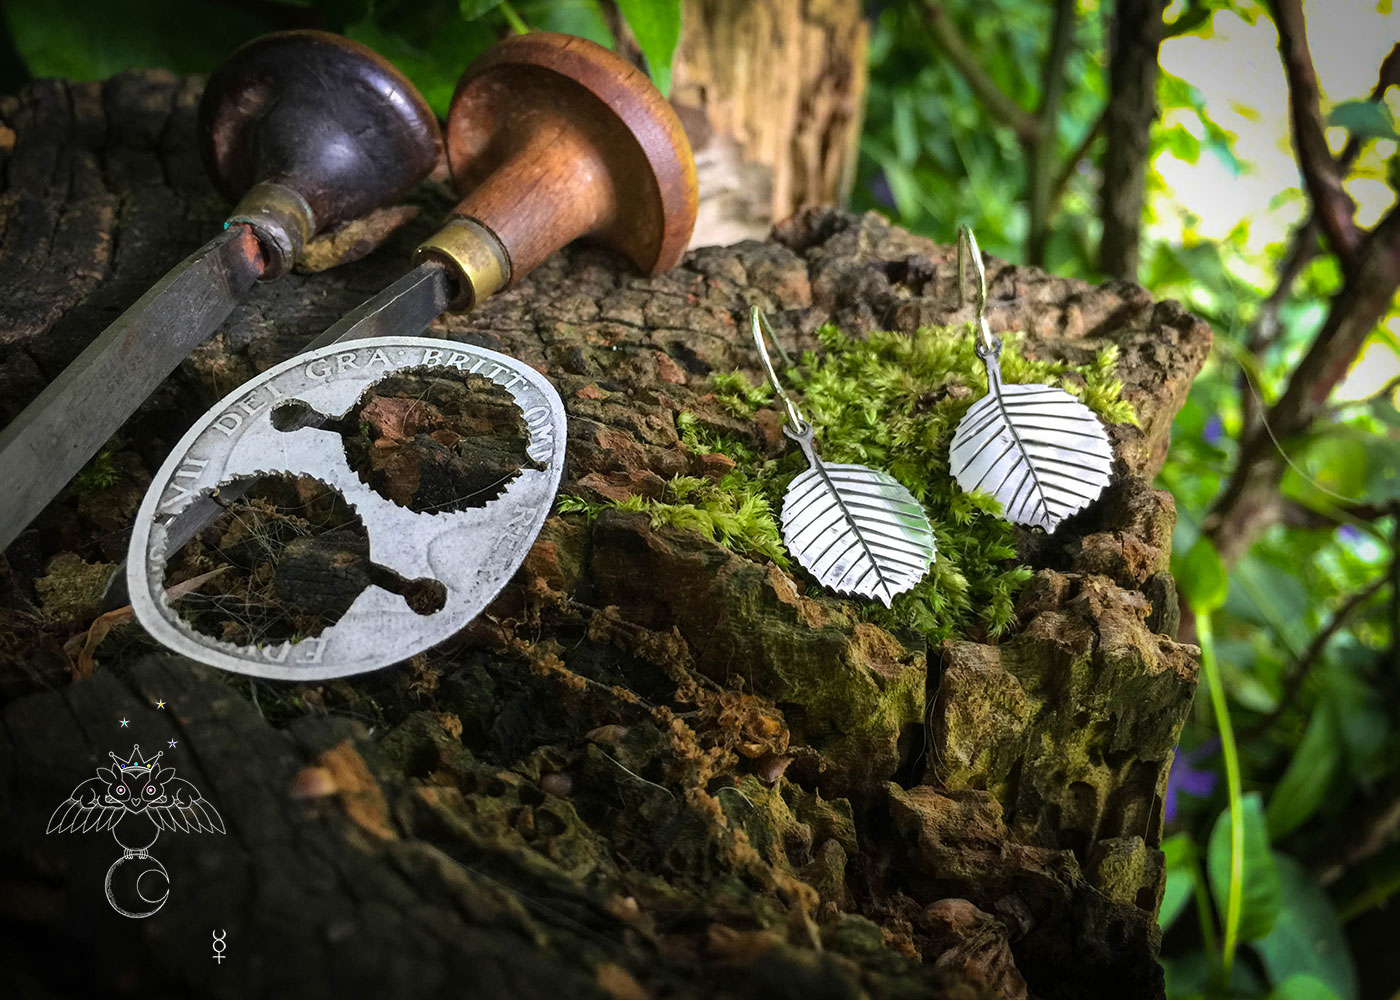 Ogham tree jewellery handmade and upcycled coin silver alder leaves leaf earrings